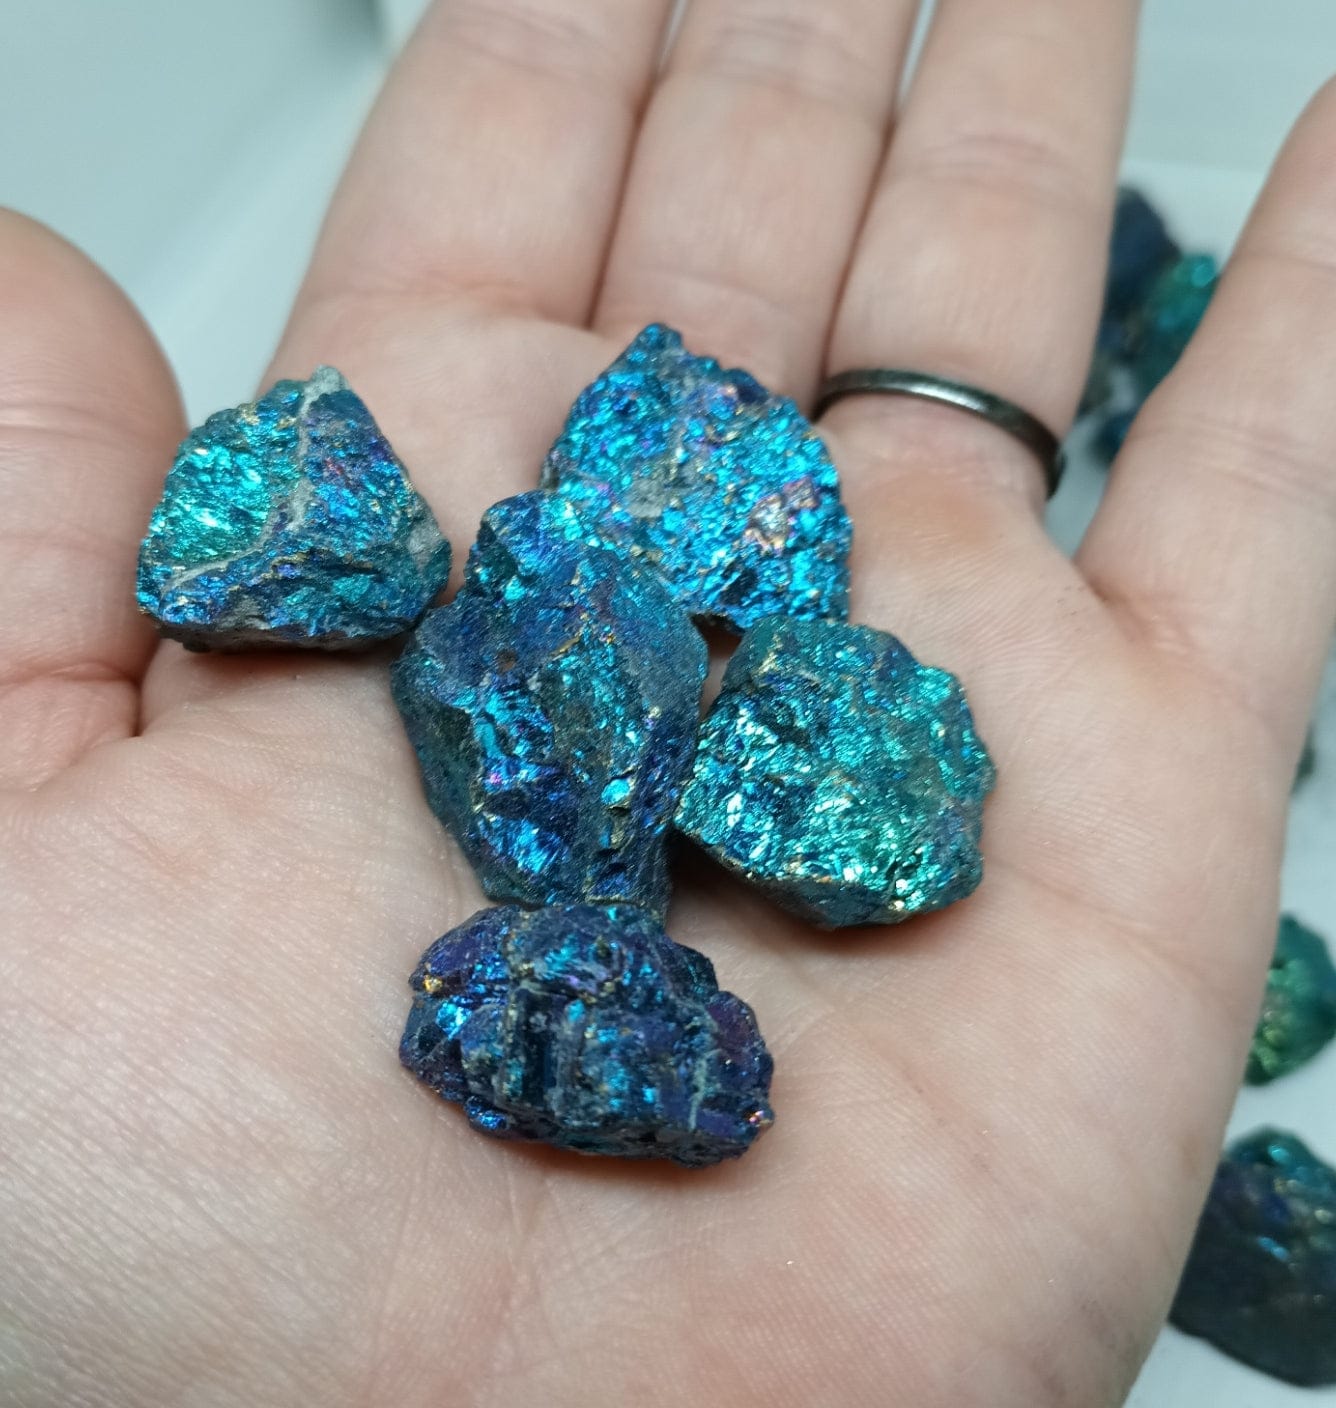  Peacock Ore 2 pcs Bright Blue, Purple and Teal Chalcopyrite Bornite Crystal- Guiding Lights Boutique